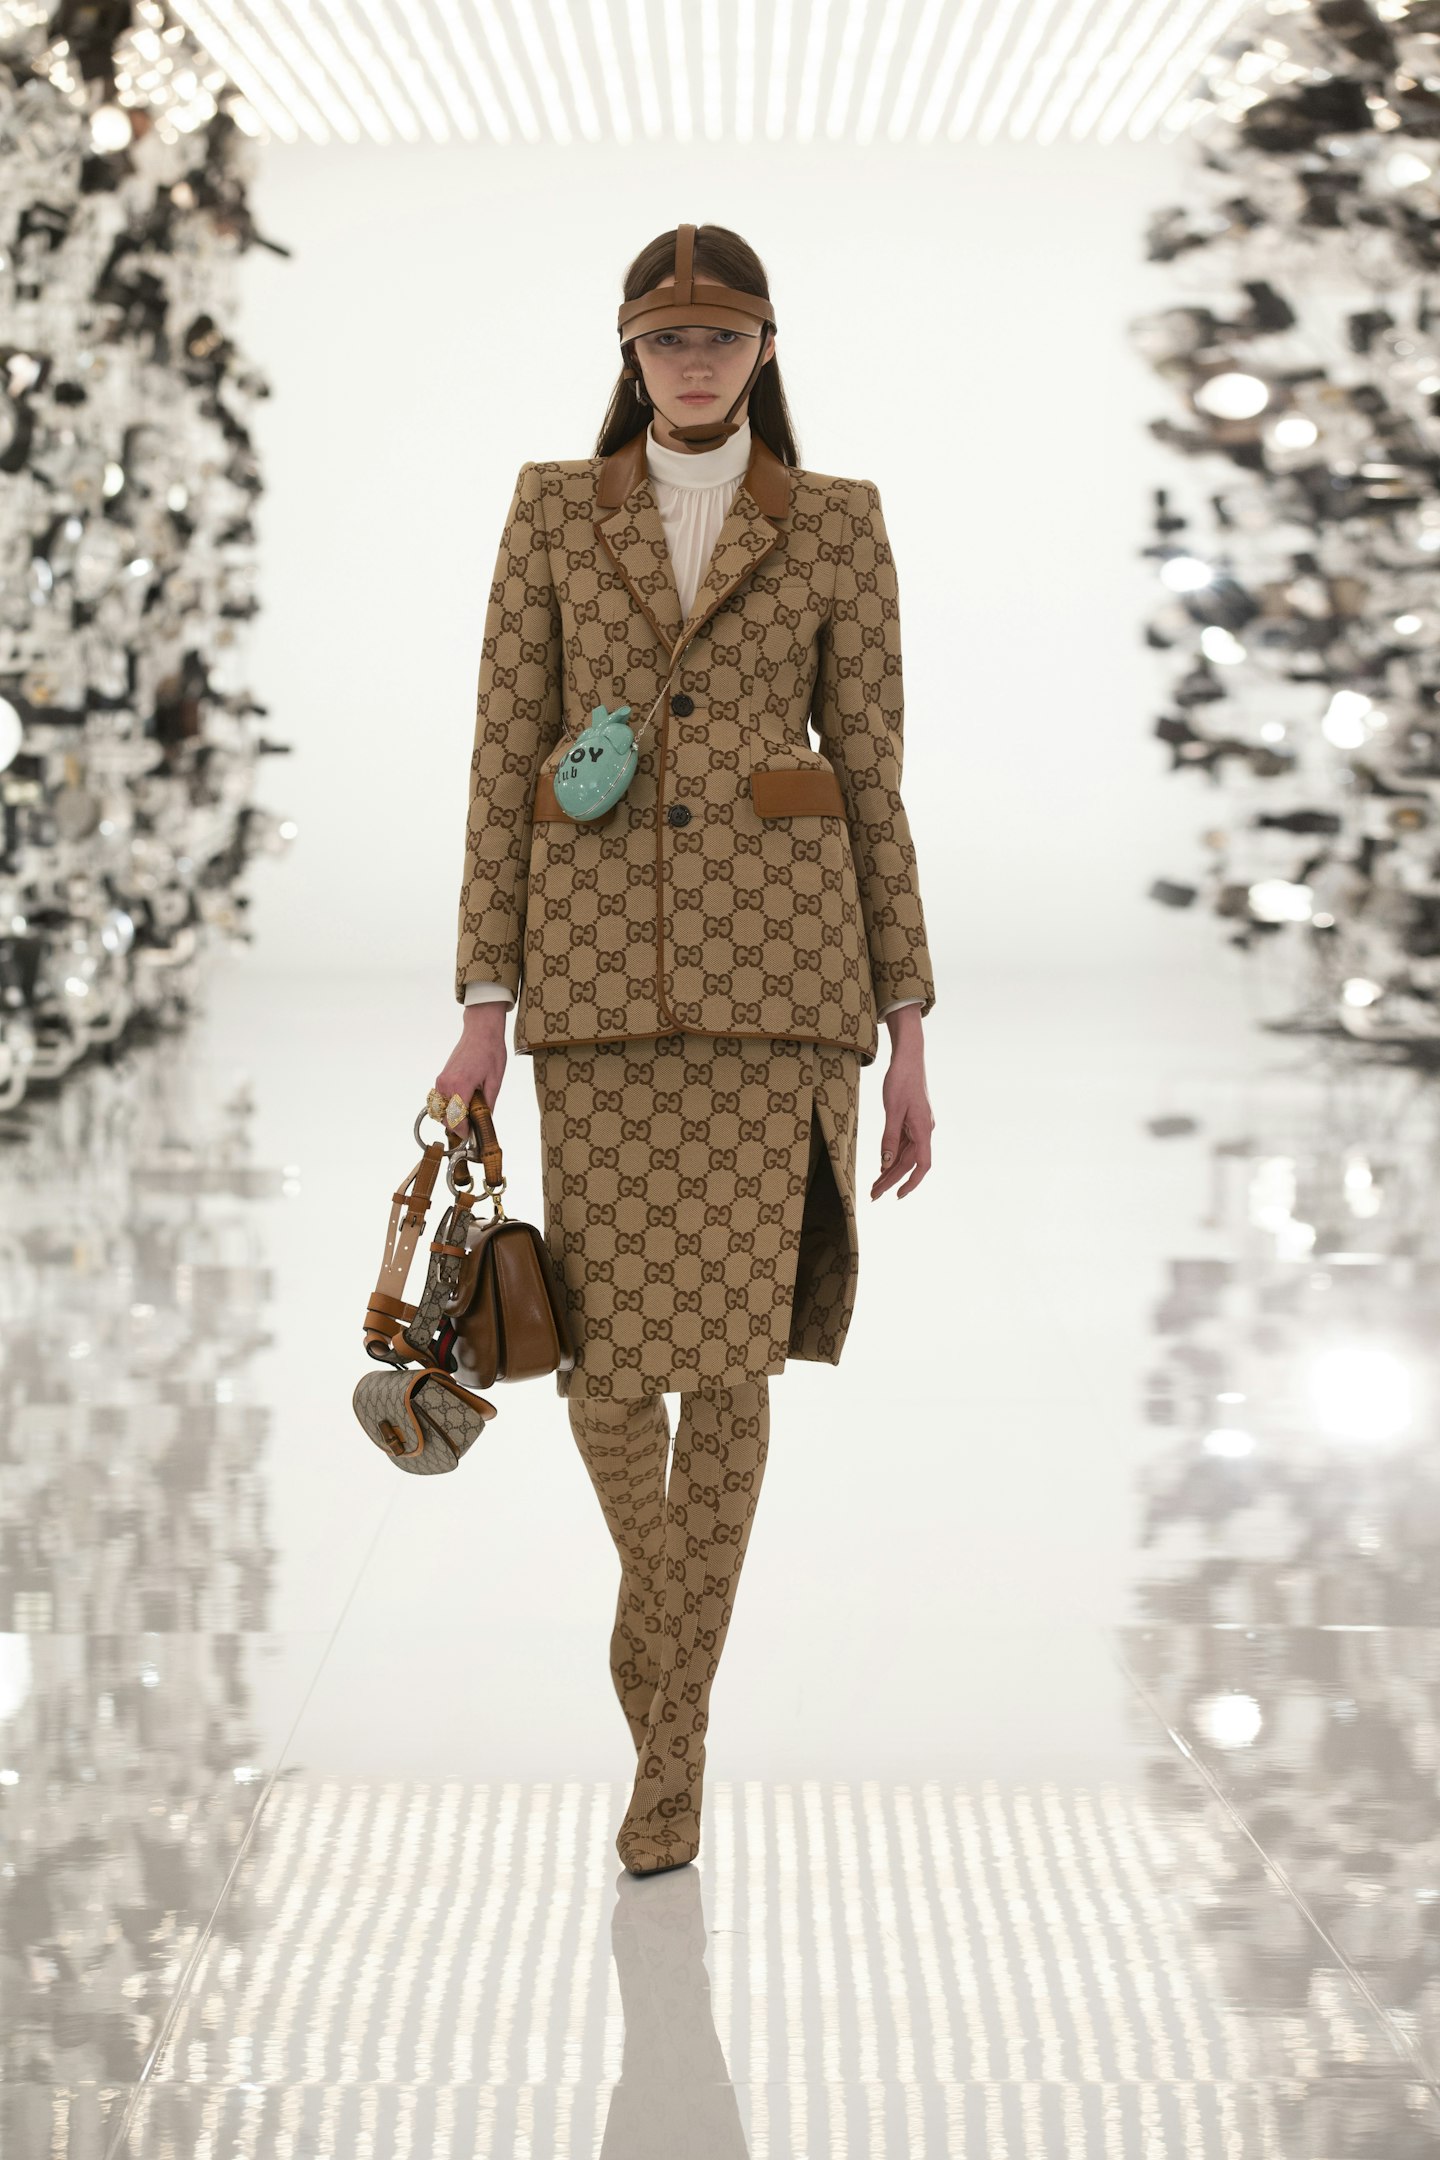 A model wearing a beige skirt suit as part of 'The Hacking Project' 